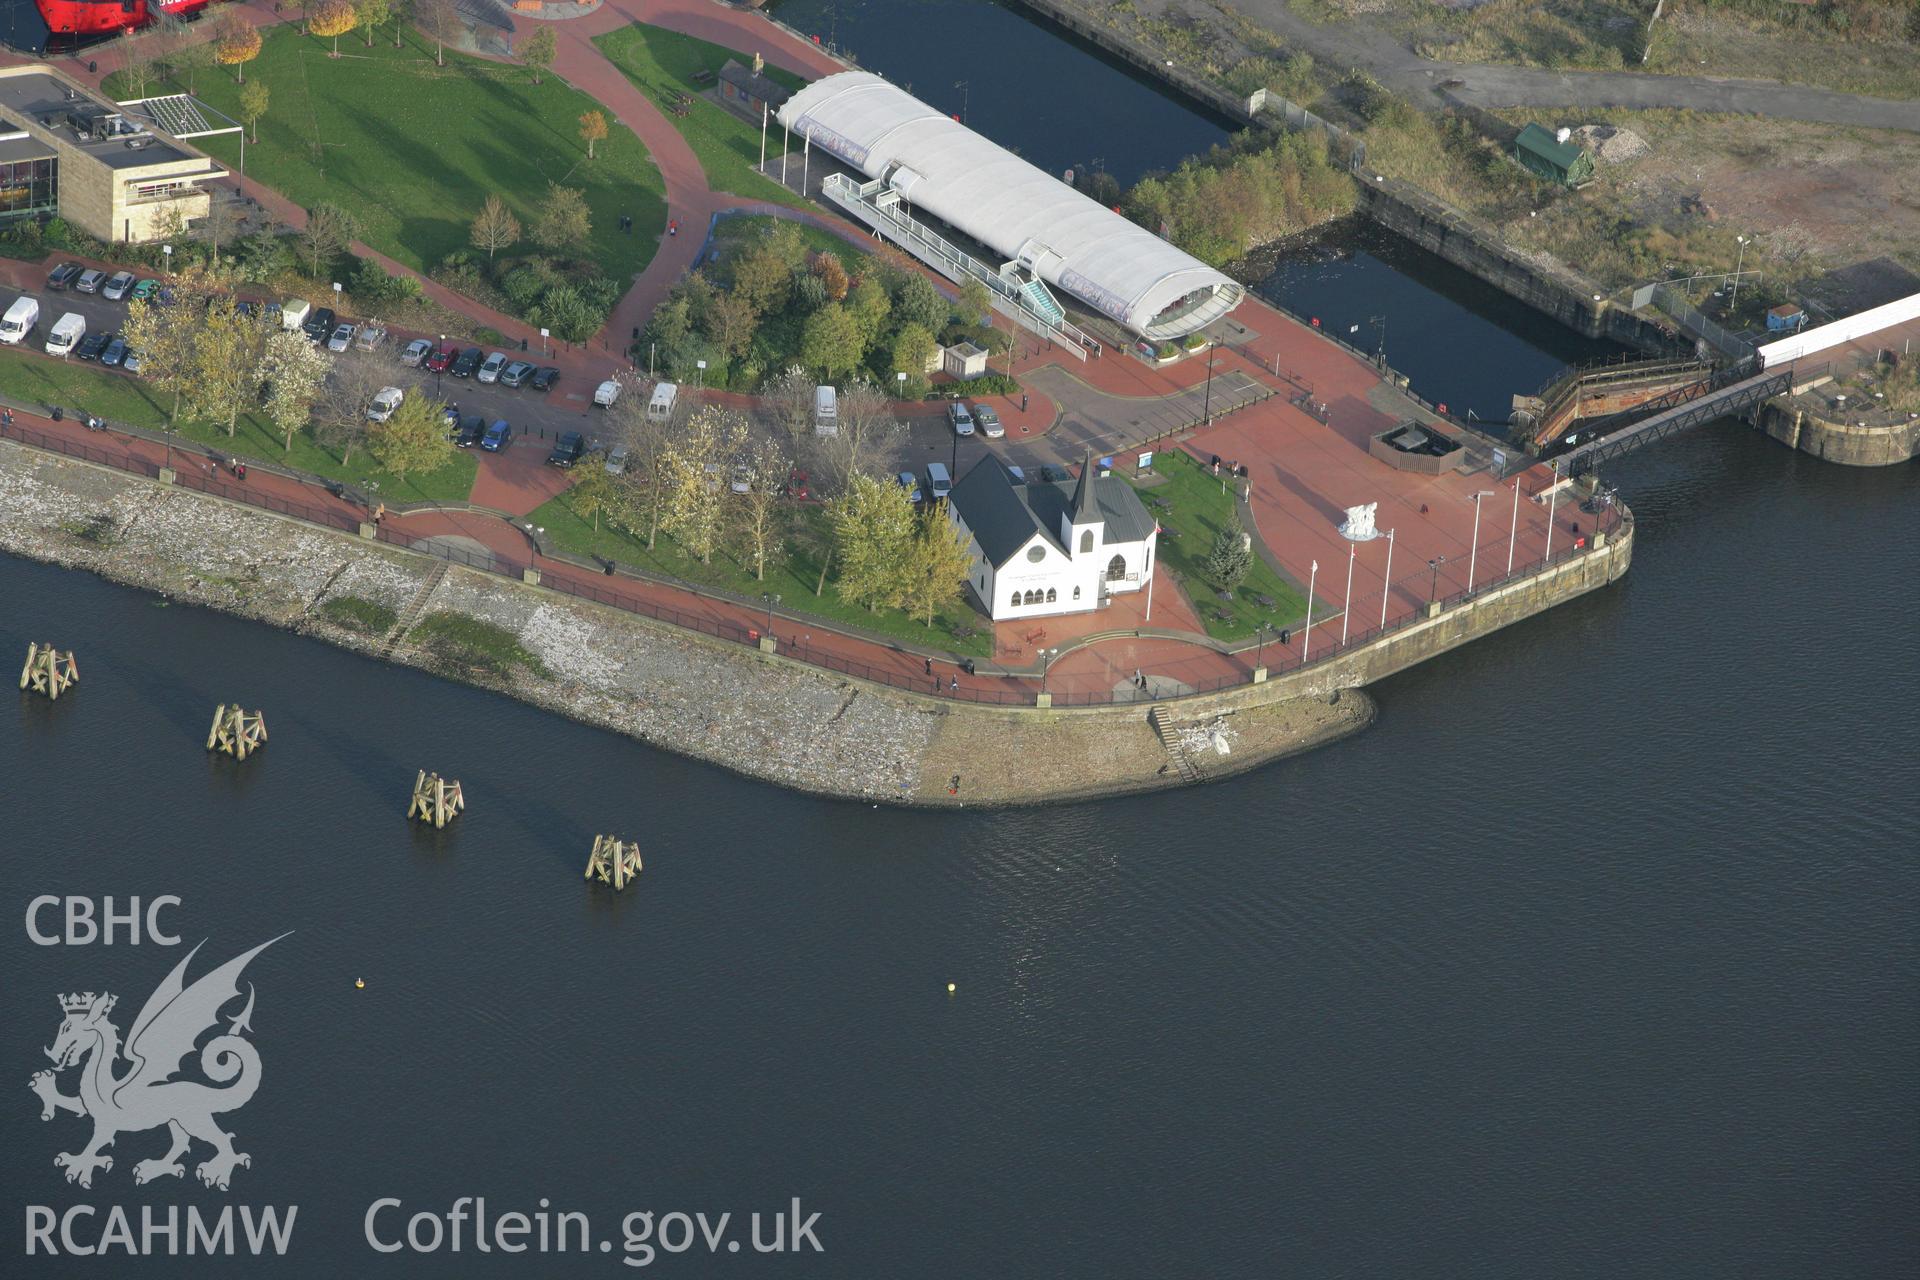 RCAHMW colour oblique photograph of Norwegian Church, Bute East Dock, Cardiff. Taken by Toby Driver on 12/11/2008.